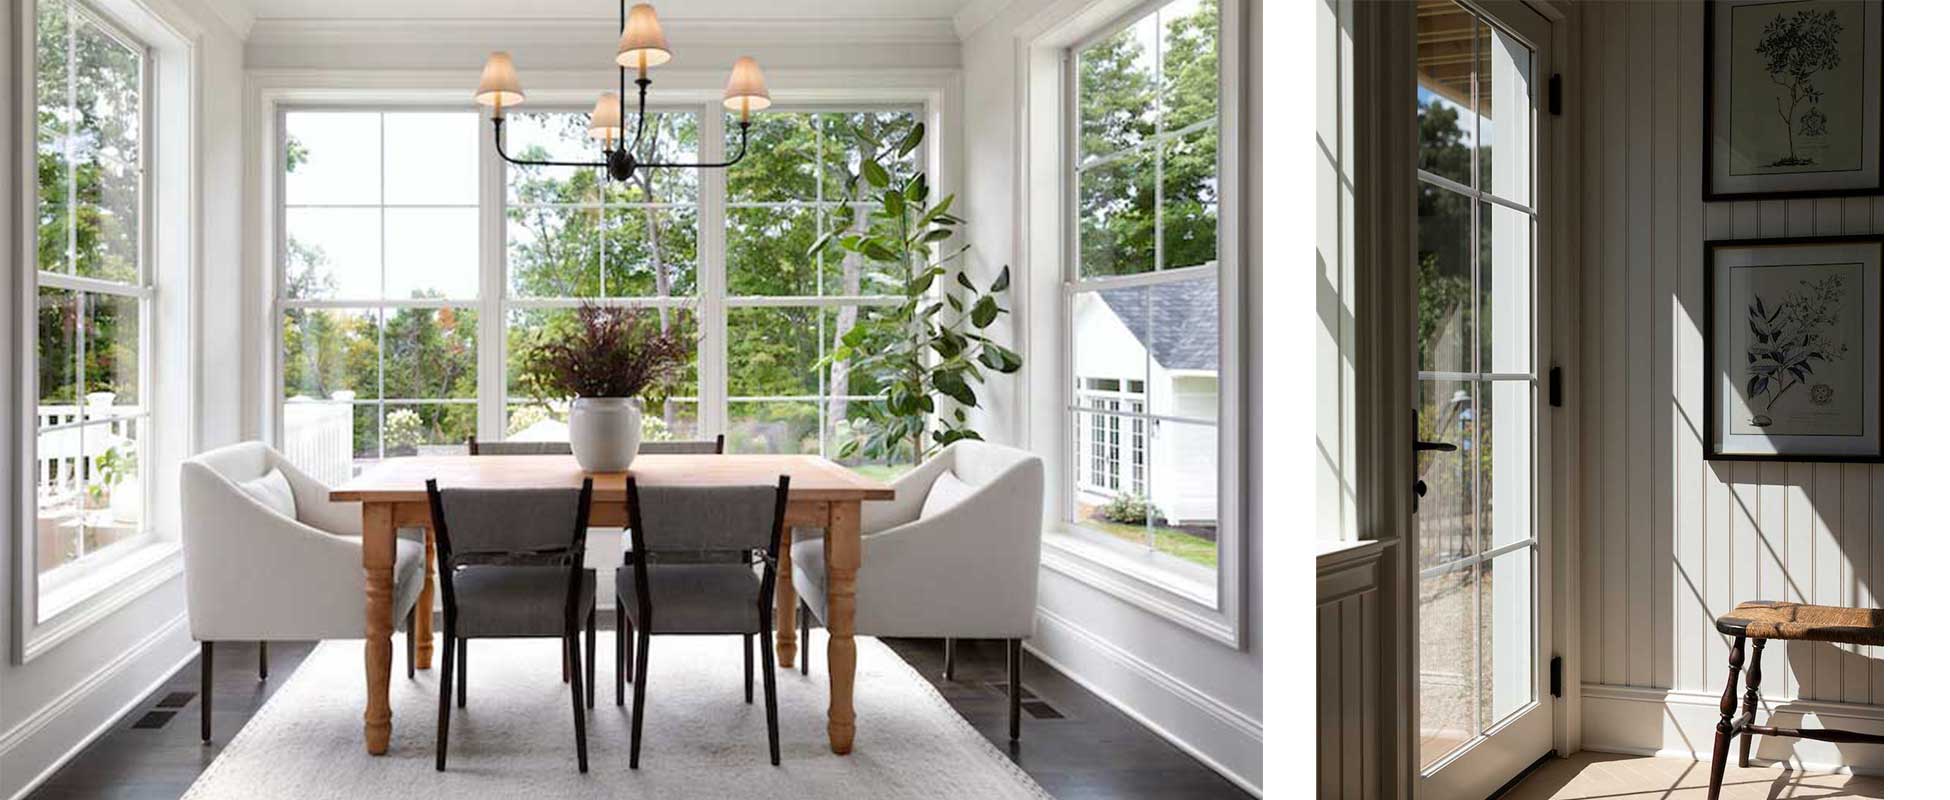 A dining room surrounded by Marvin Essential double hung windows on three sides with a hanging light, table, and chairs, and light coming in through a Marvin Elevate Inswing French door.